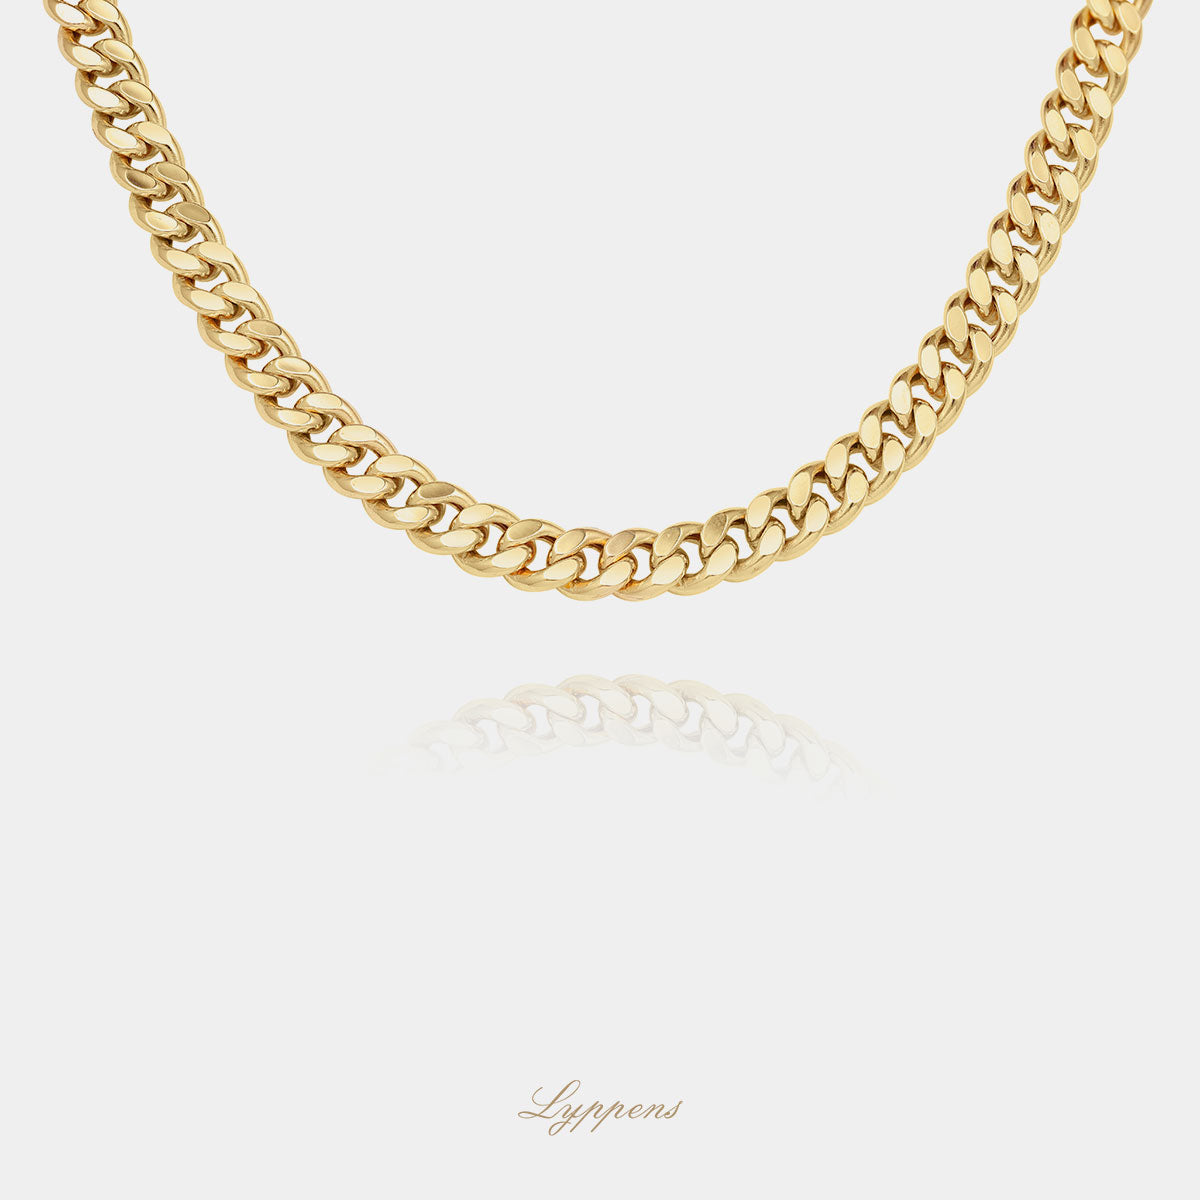 Yellow gold gourmet link necklace